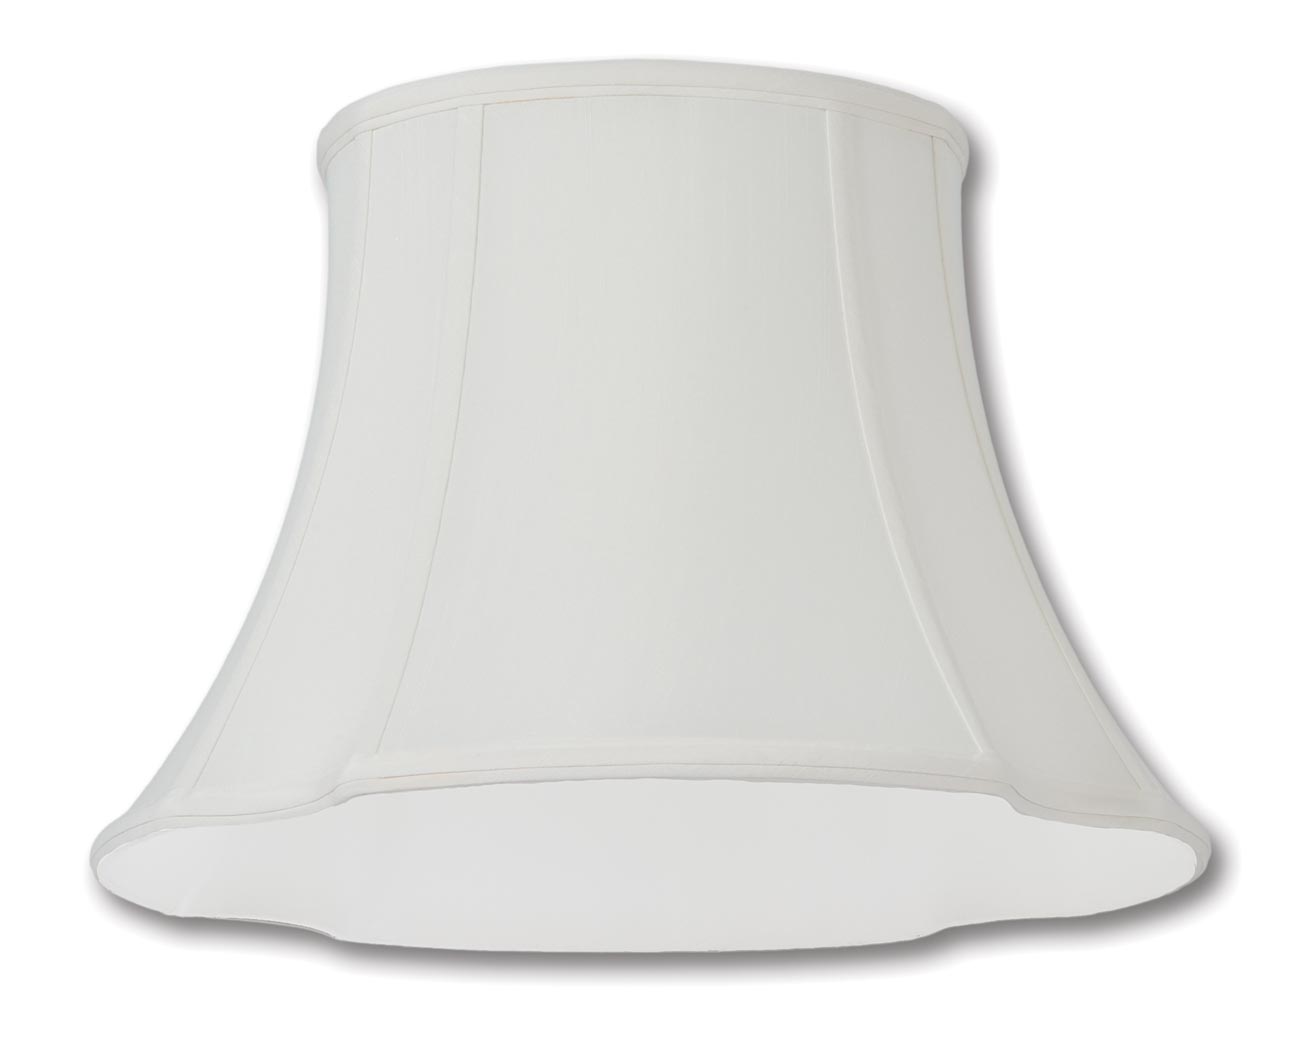 French Oval Lamp Shades - Eggshell Color, Tissue Shantung Material